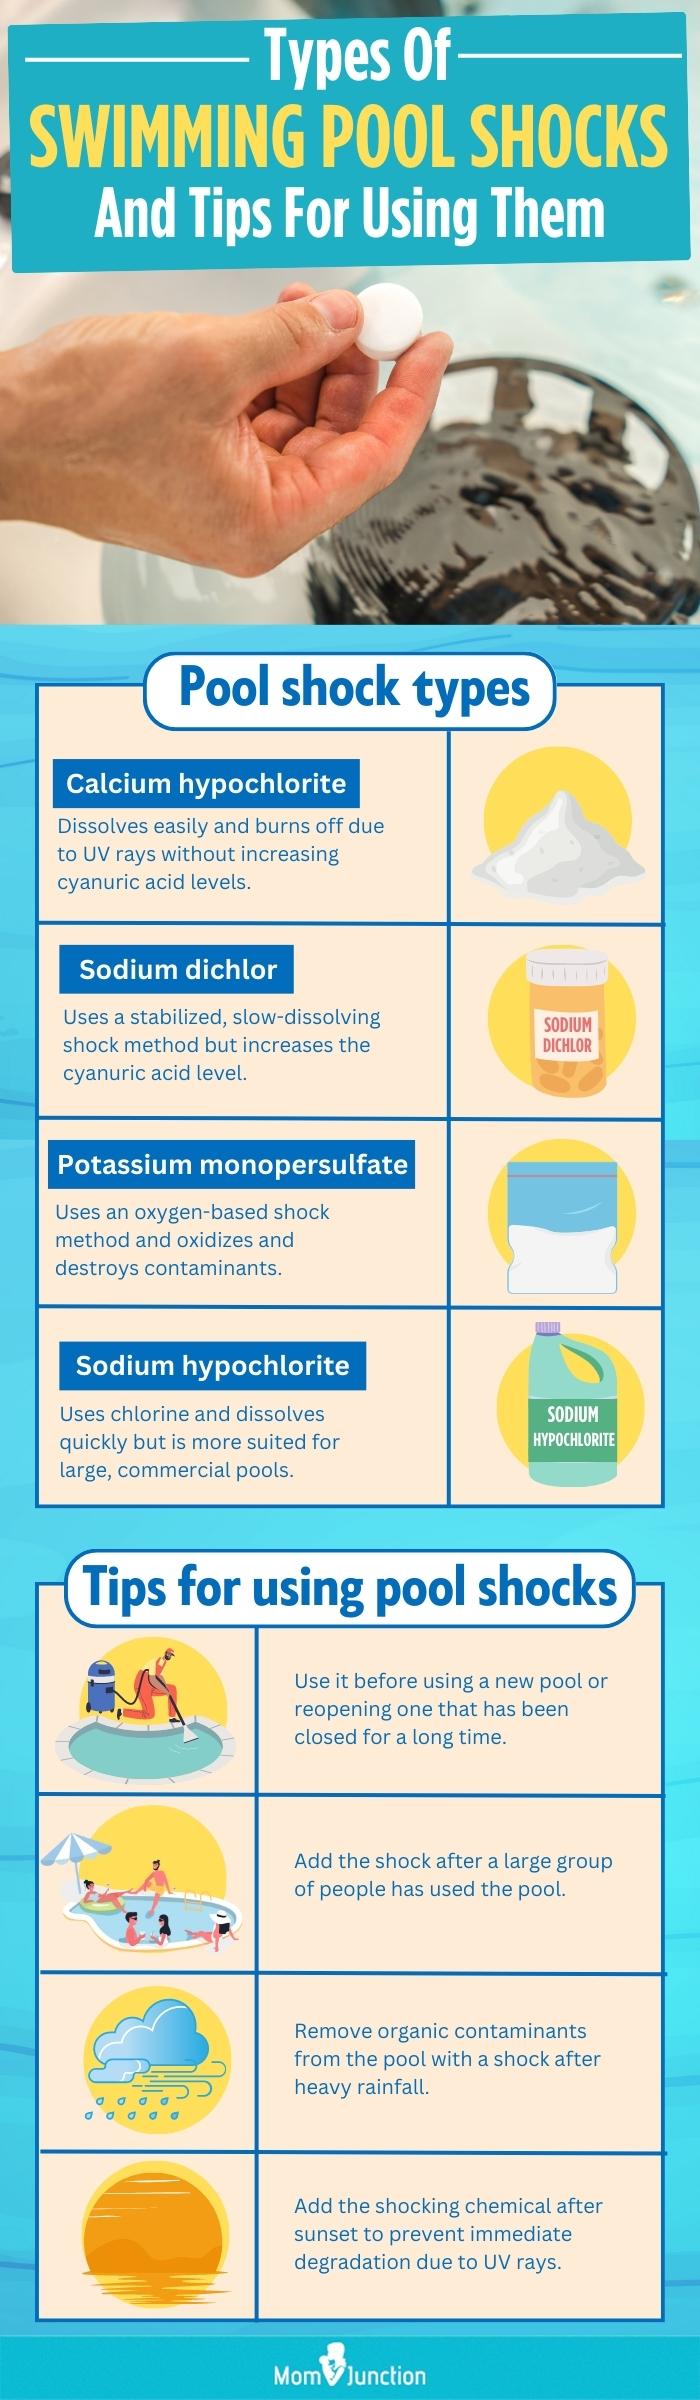 Types Of Swimming Pool Shocks And Tips For Using Them (infographic)